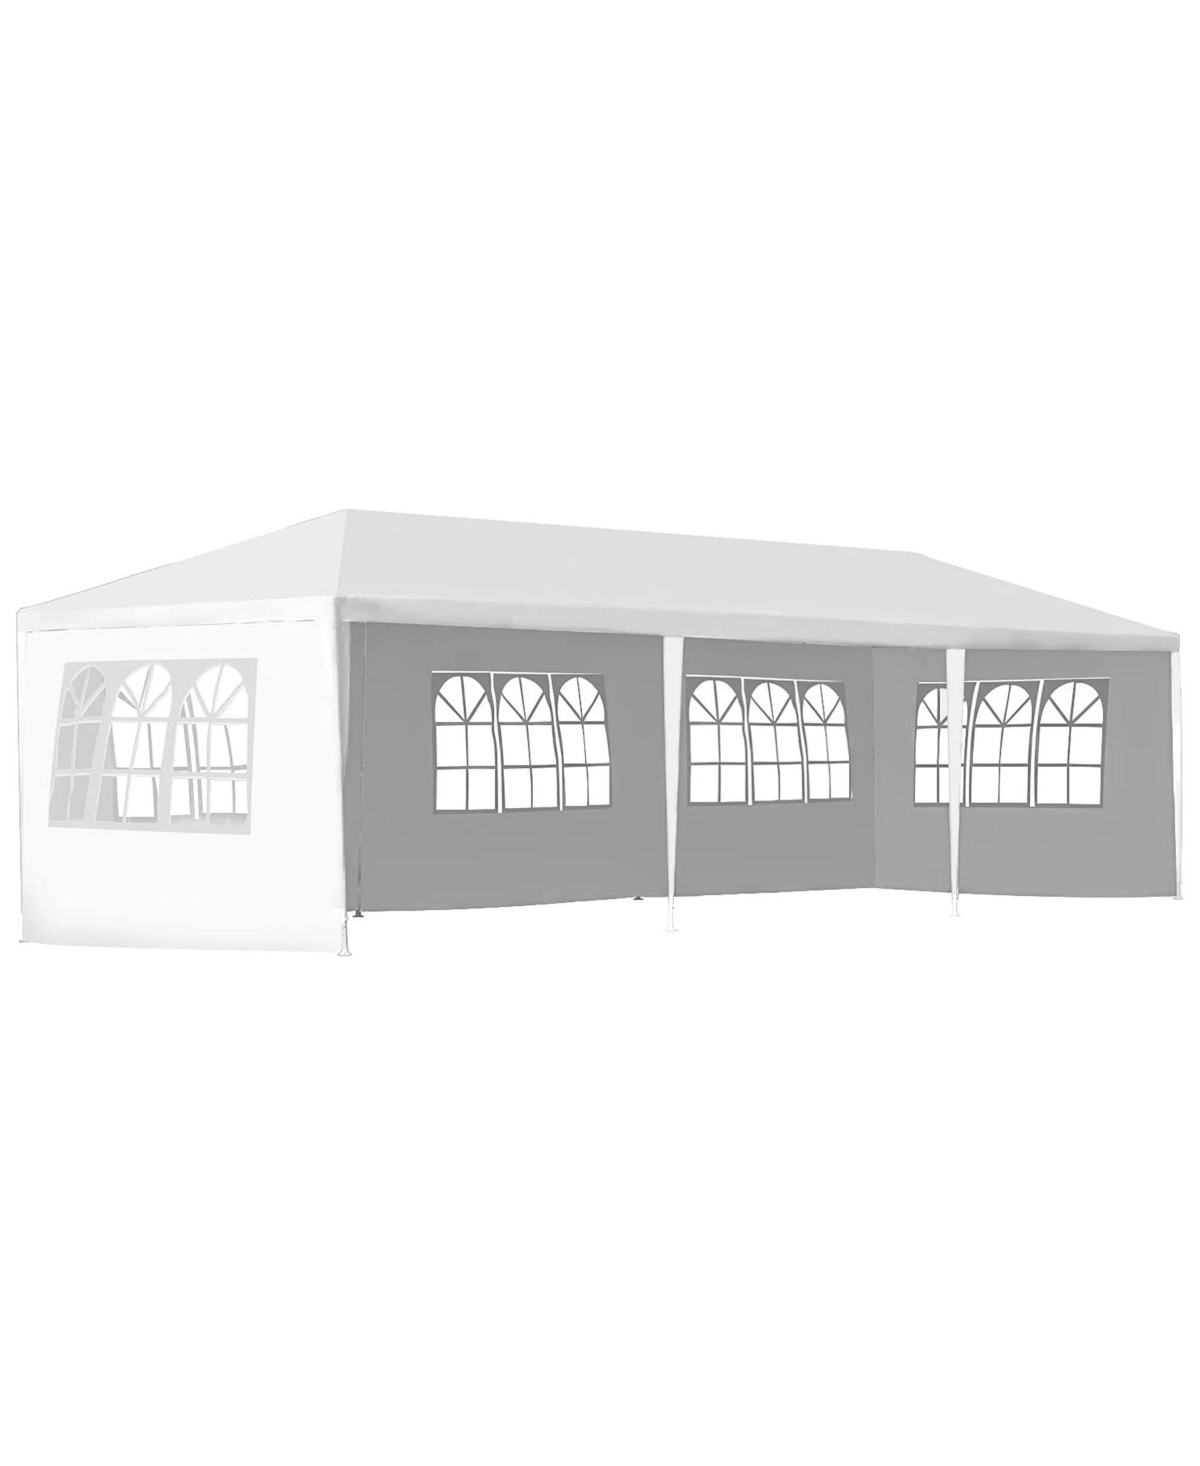 30 Ft. W x 10 Ft. D Wedding Party Tent Canopy with 5 Side Walls - White